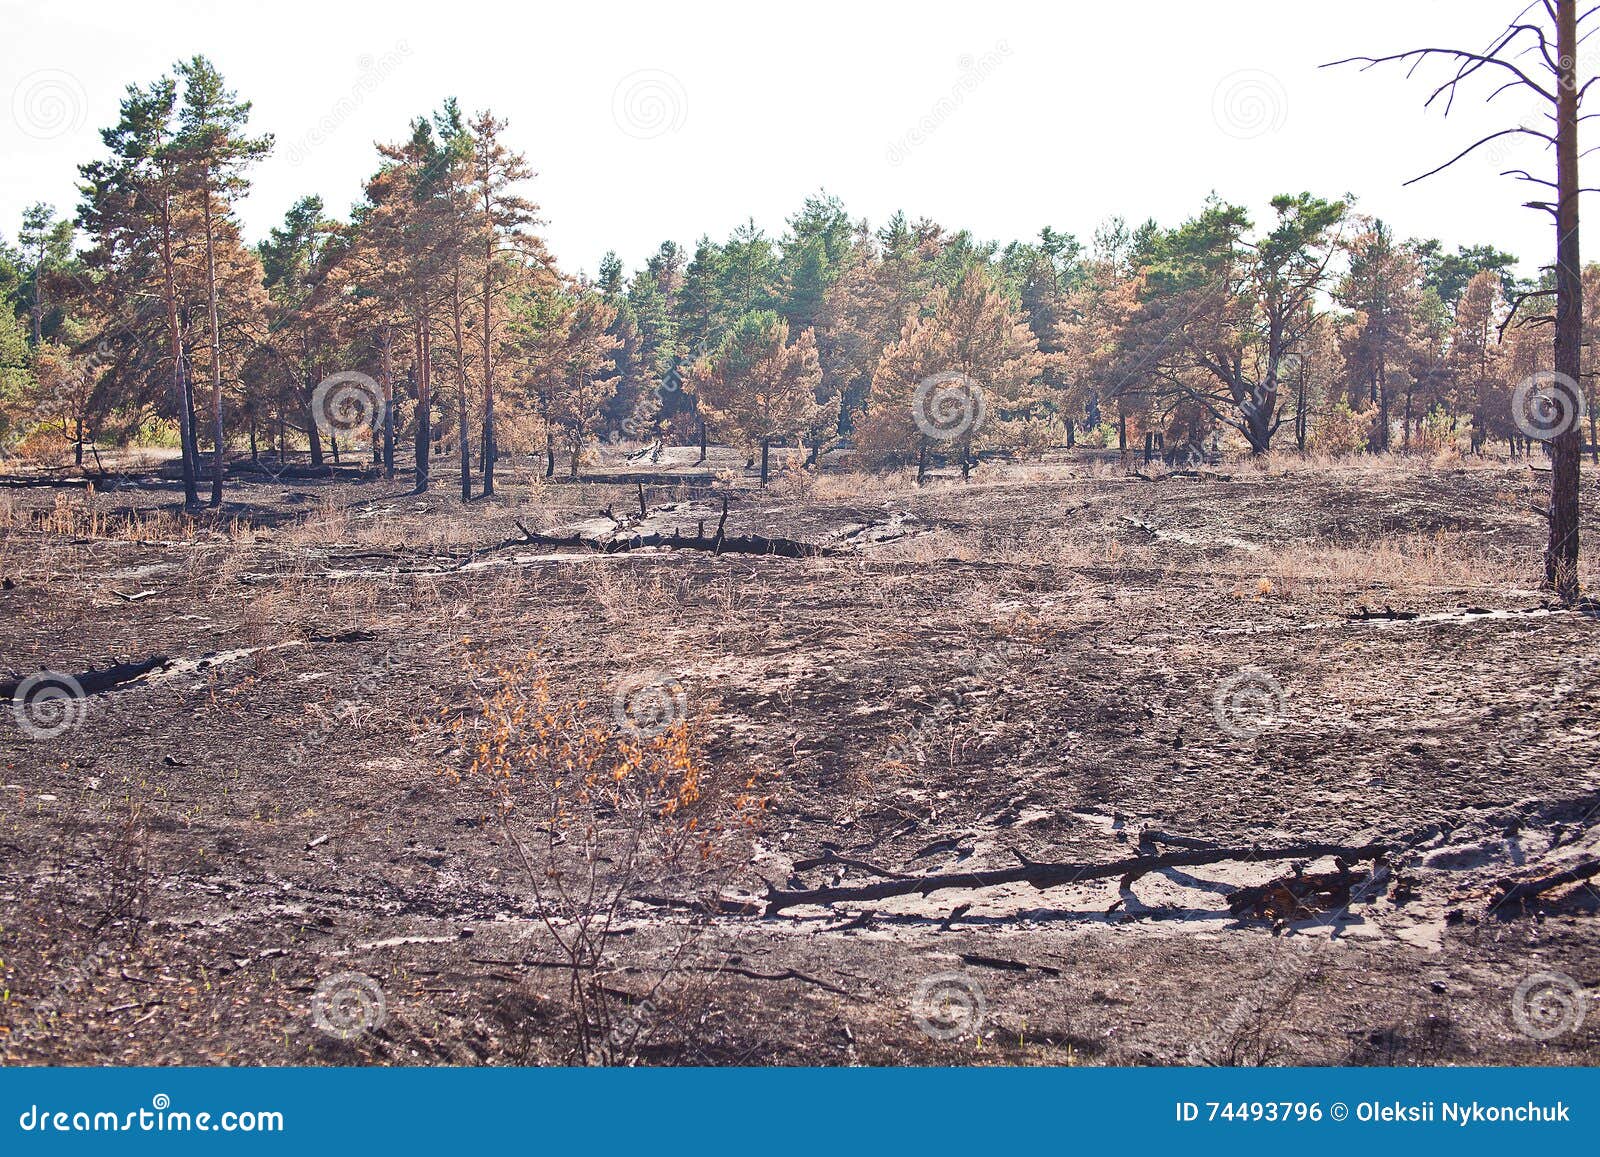 Consequences of Grassroots Wildfire in the Pine Forest Stock Photo